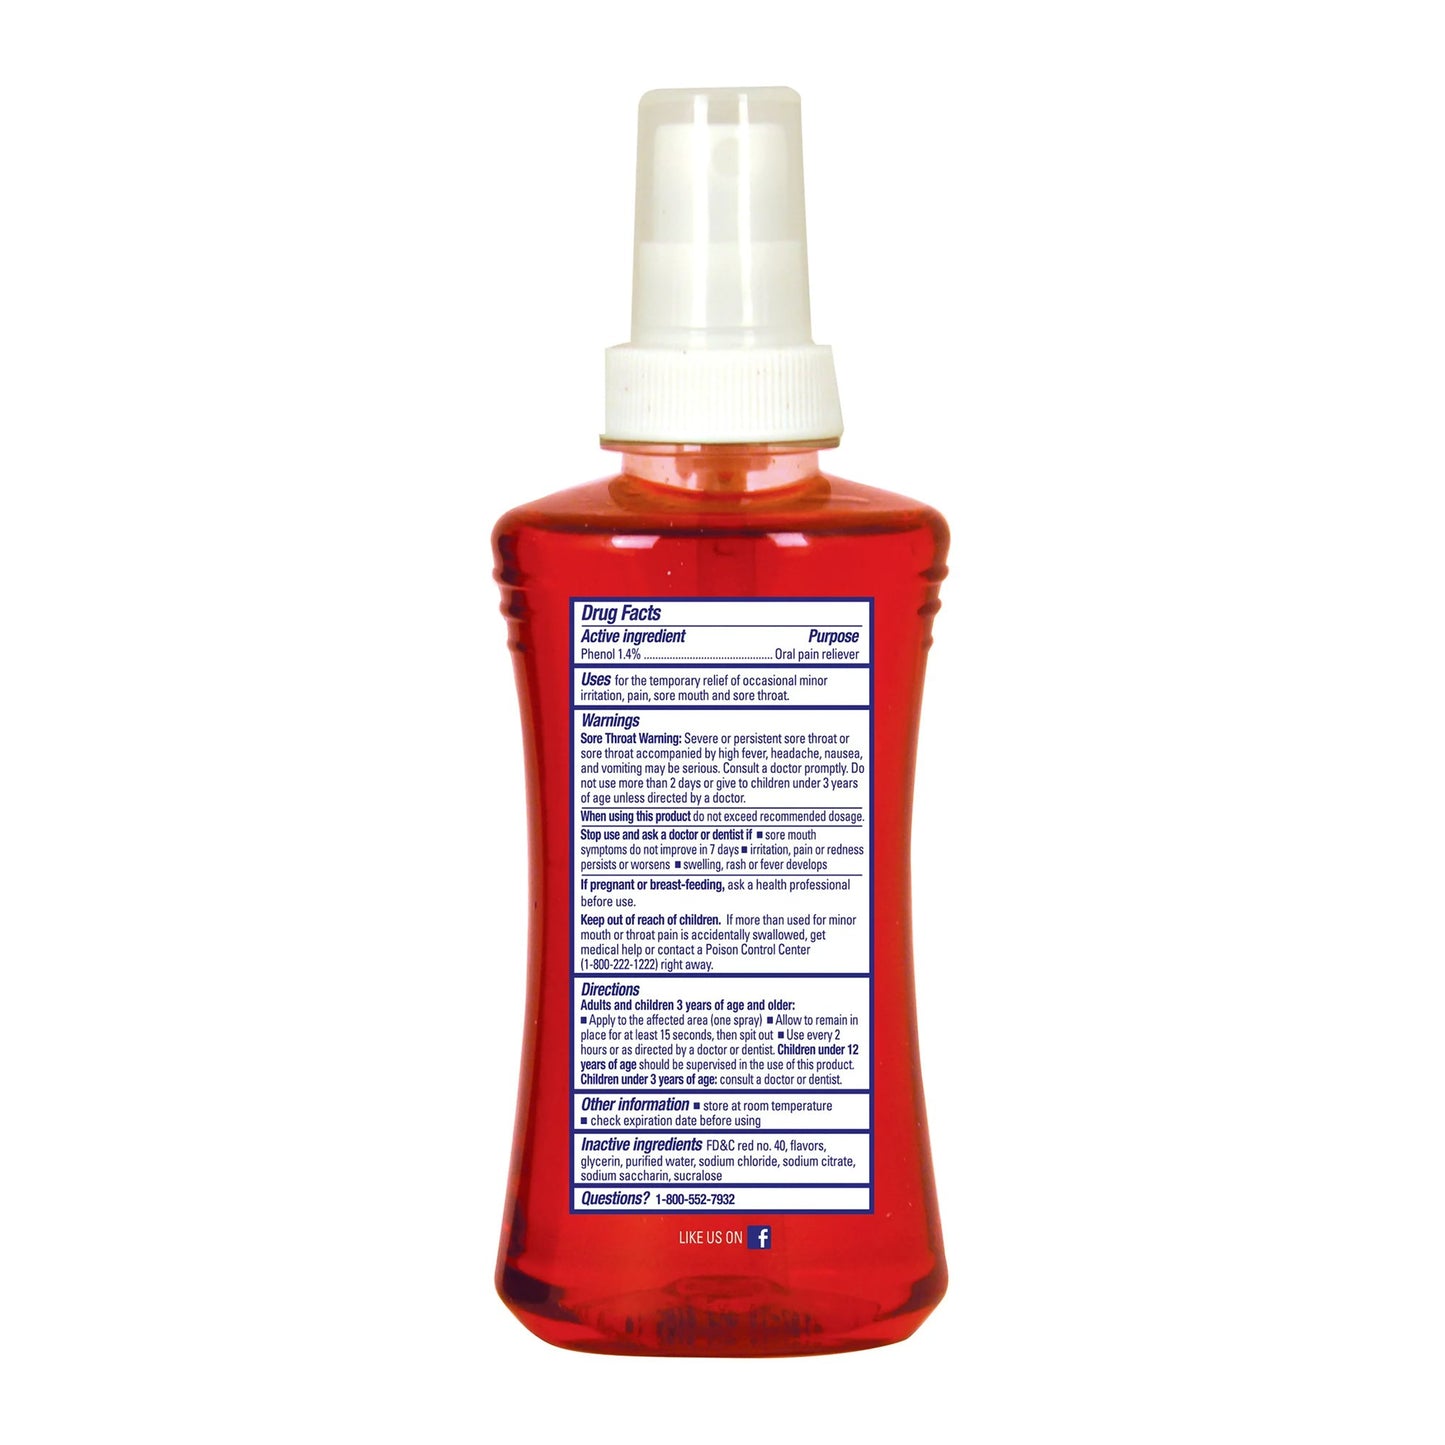 Chloraseptic® Phenol Sore Throat Relief, 6-ounce Spray Bottle